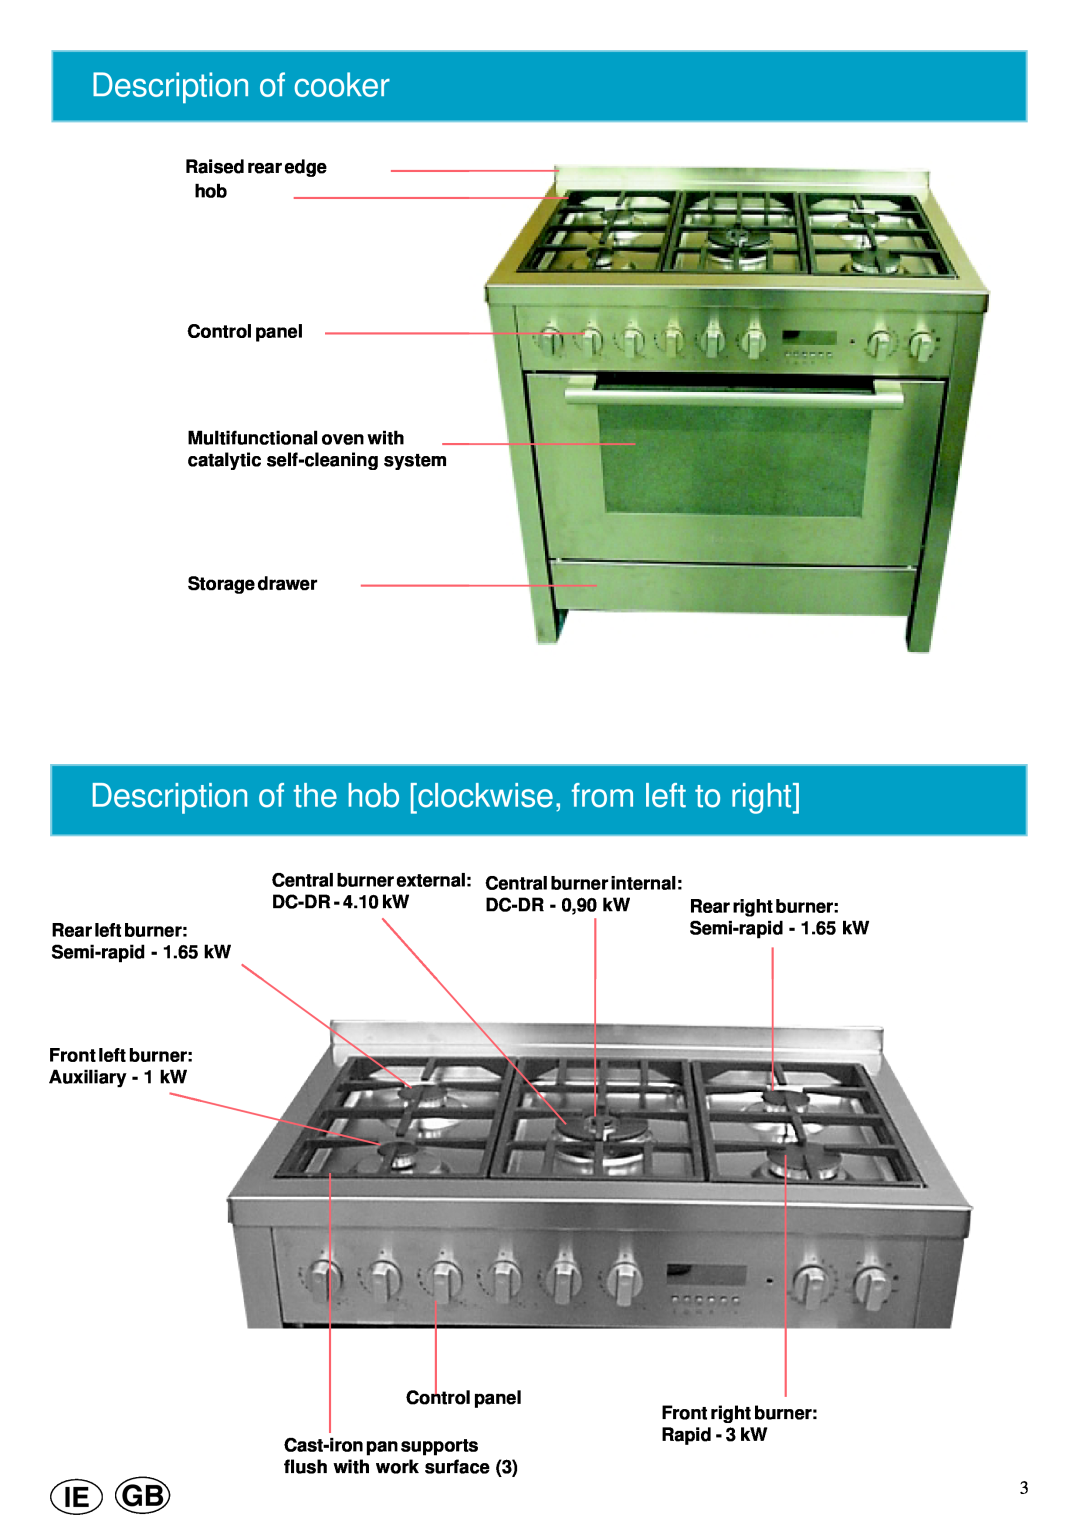 Cannon 10460G Description of cooker, Description of the hob clockwise, from left to right, Storage drawer, DC-DR - 4.10 kW 